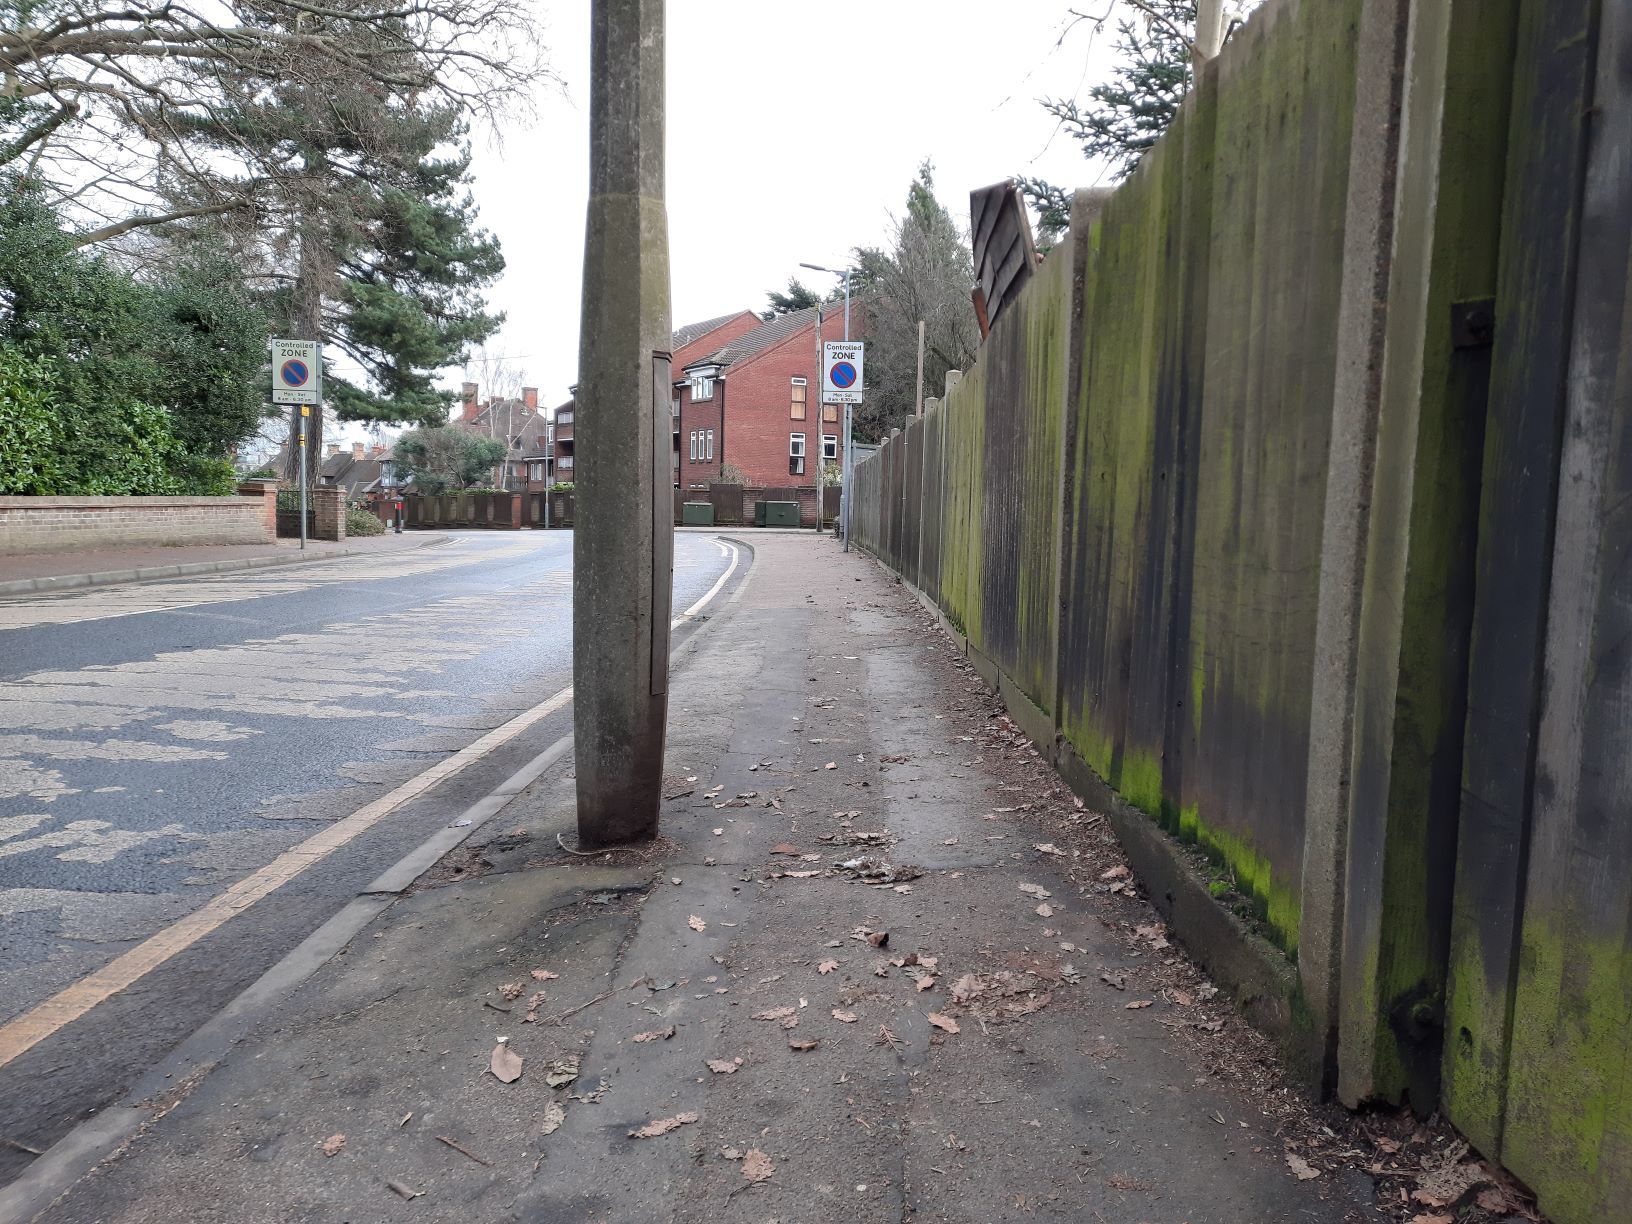 Residents and councillors were worried about the new access point. This is the view that would have been met by people leaving the proposed development